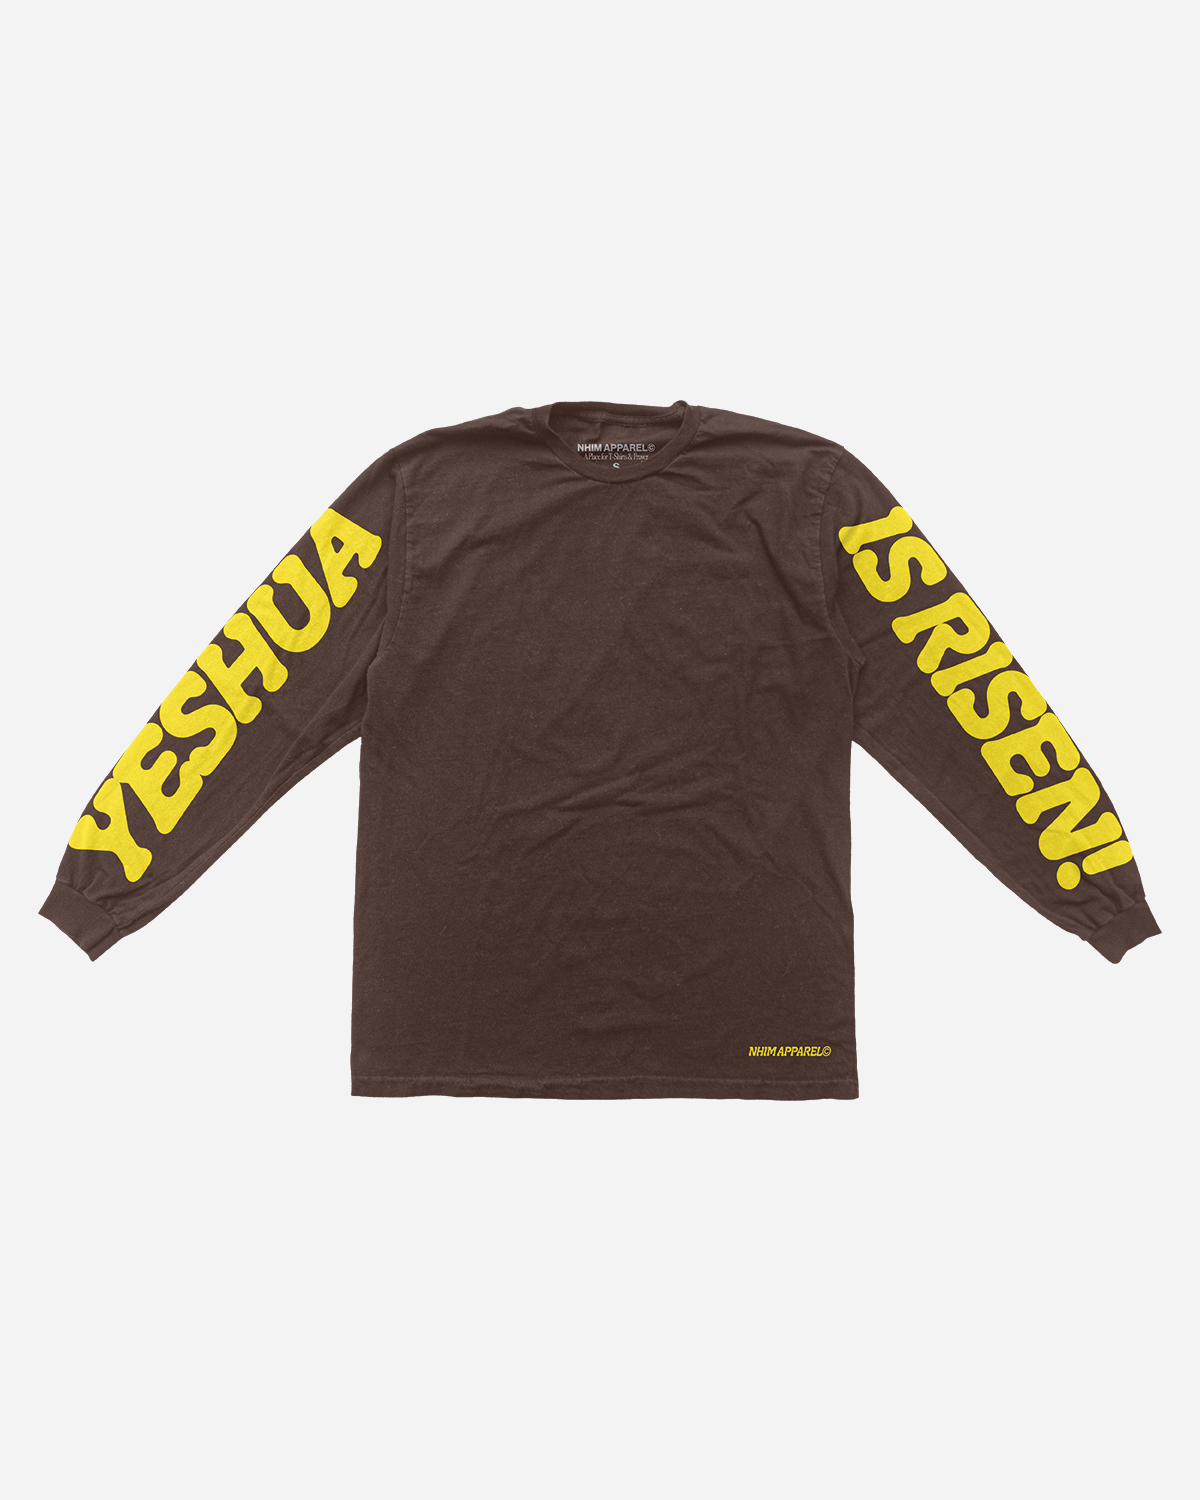 Christian longsleeve shirt. Yeshua is Risen! Yeshua (which means to save and deliver) is the the literal Hebrew/Aramaic name of Jesus. Made in USA. NHiM Apparel Christian Clothing Company